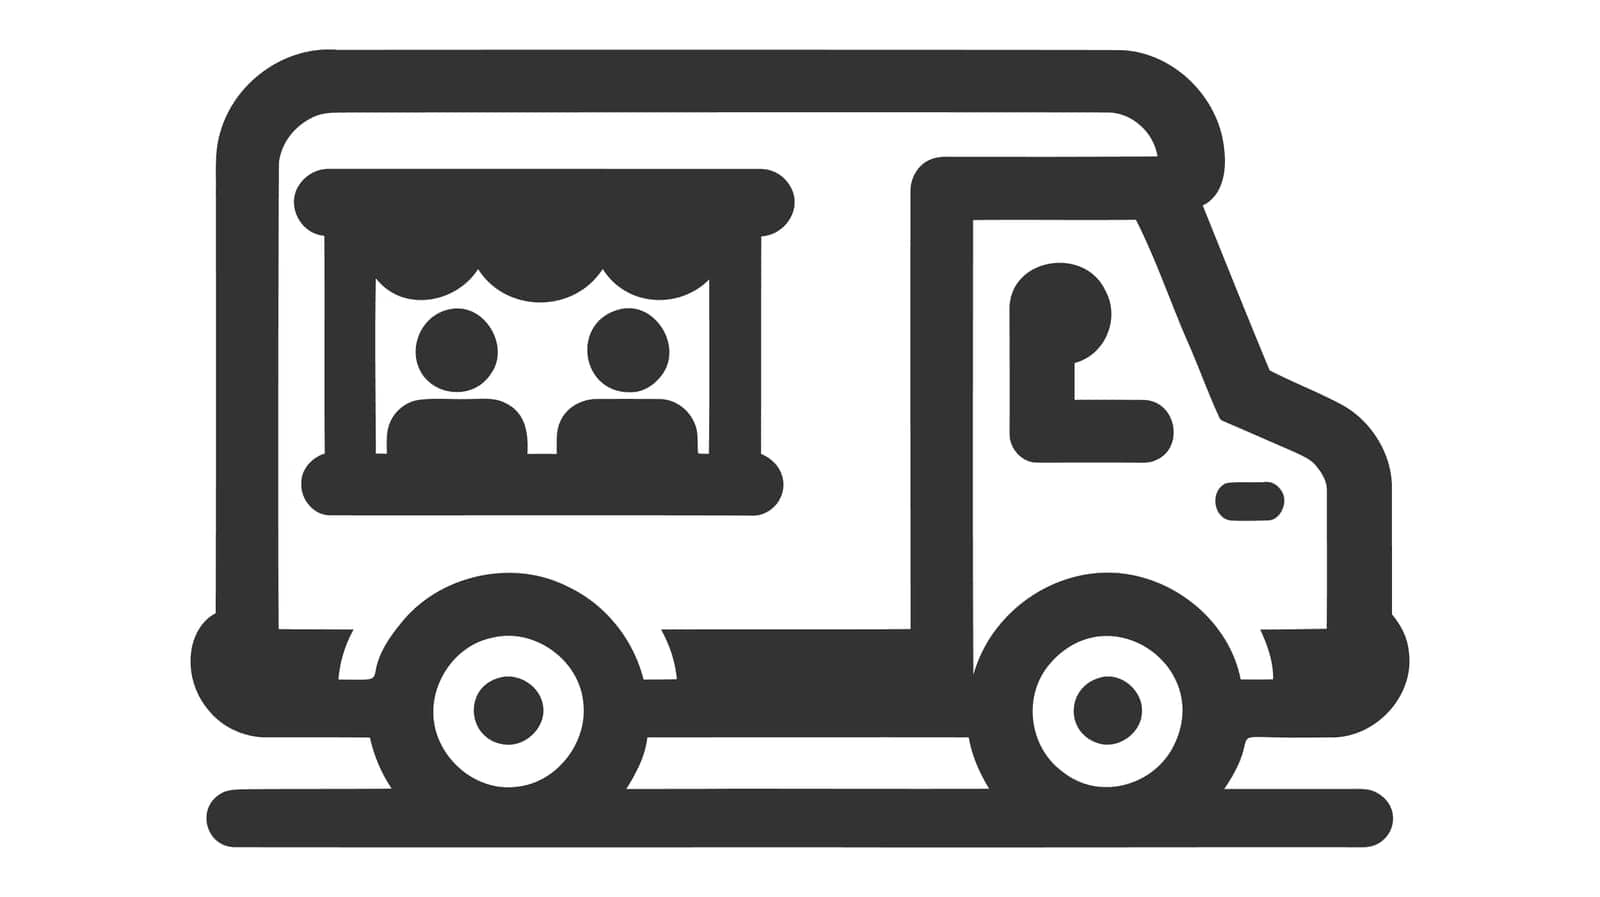 Street food truck icon template. Vector line trade van illustration. Mobile cafe car logo background. Festival shop transport to cook and sell meals